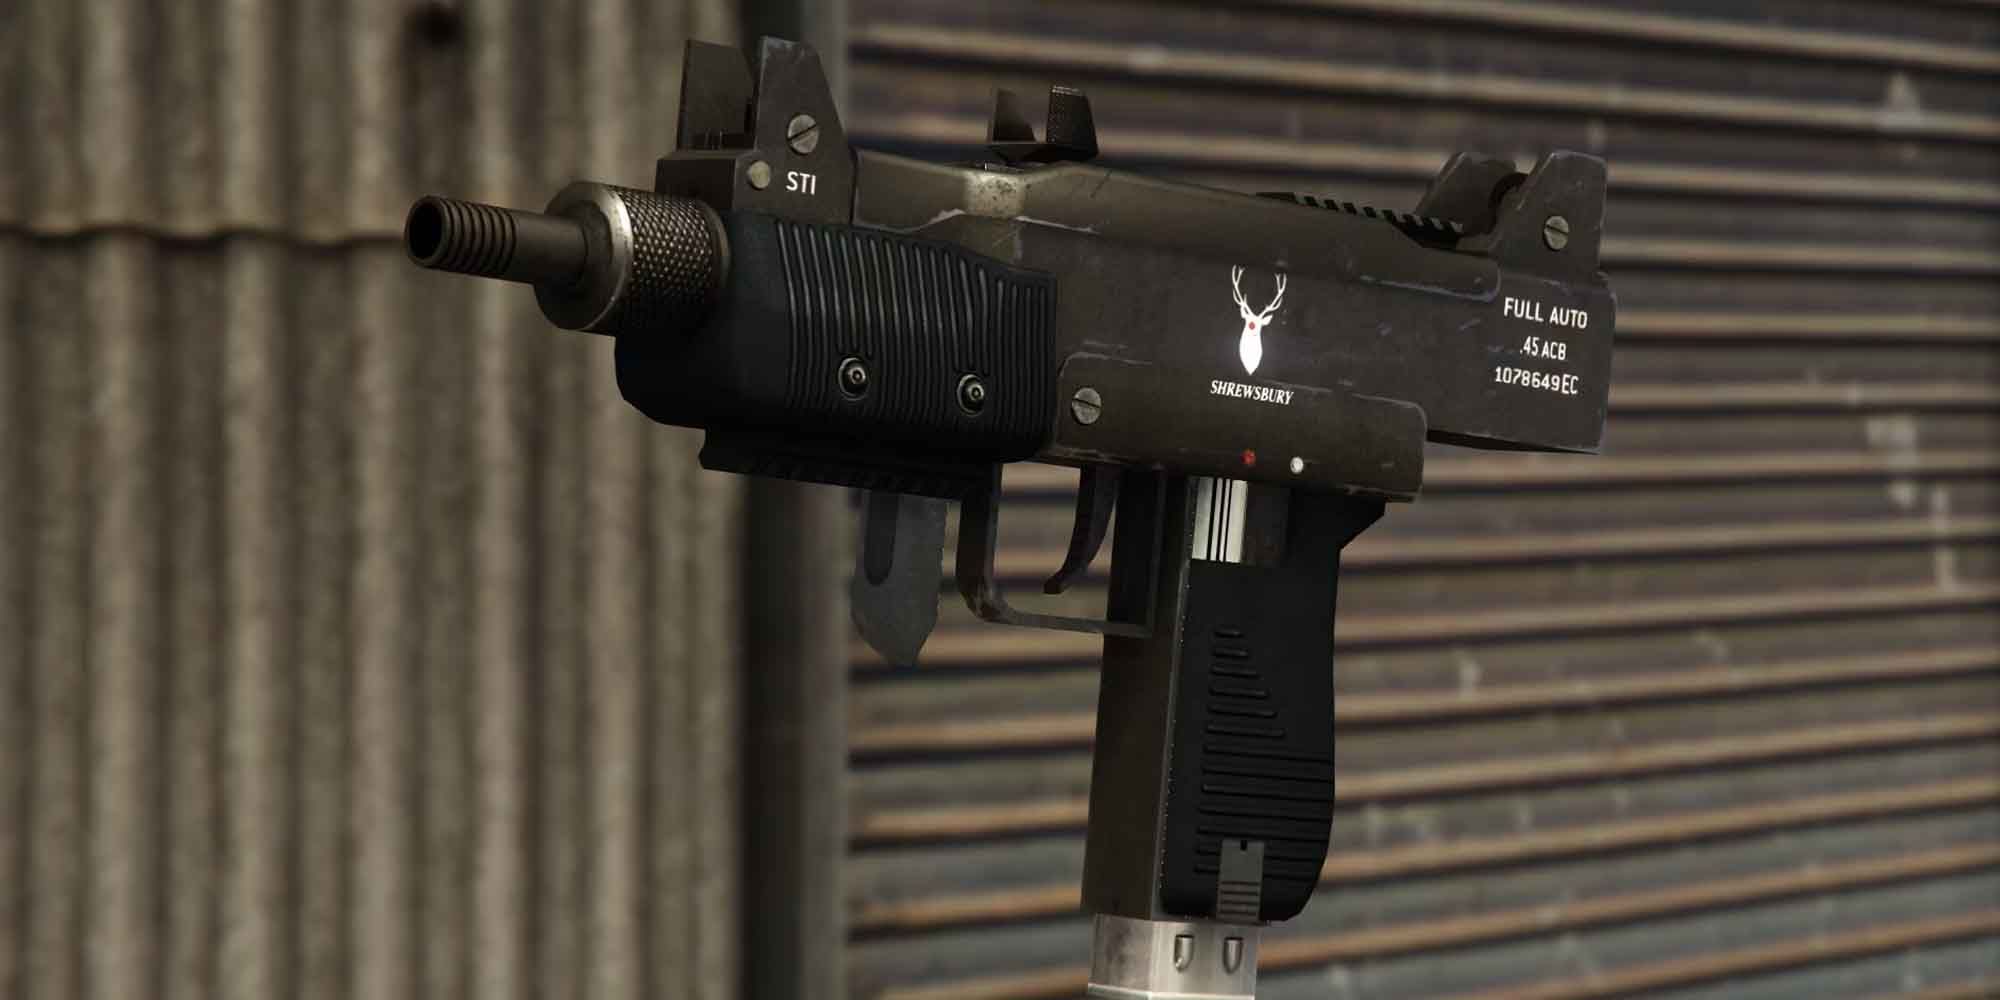 The fast-firing MicroSMG in GTA 5 is a great close-to-medium range weapon